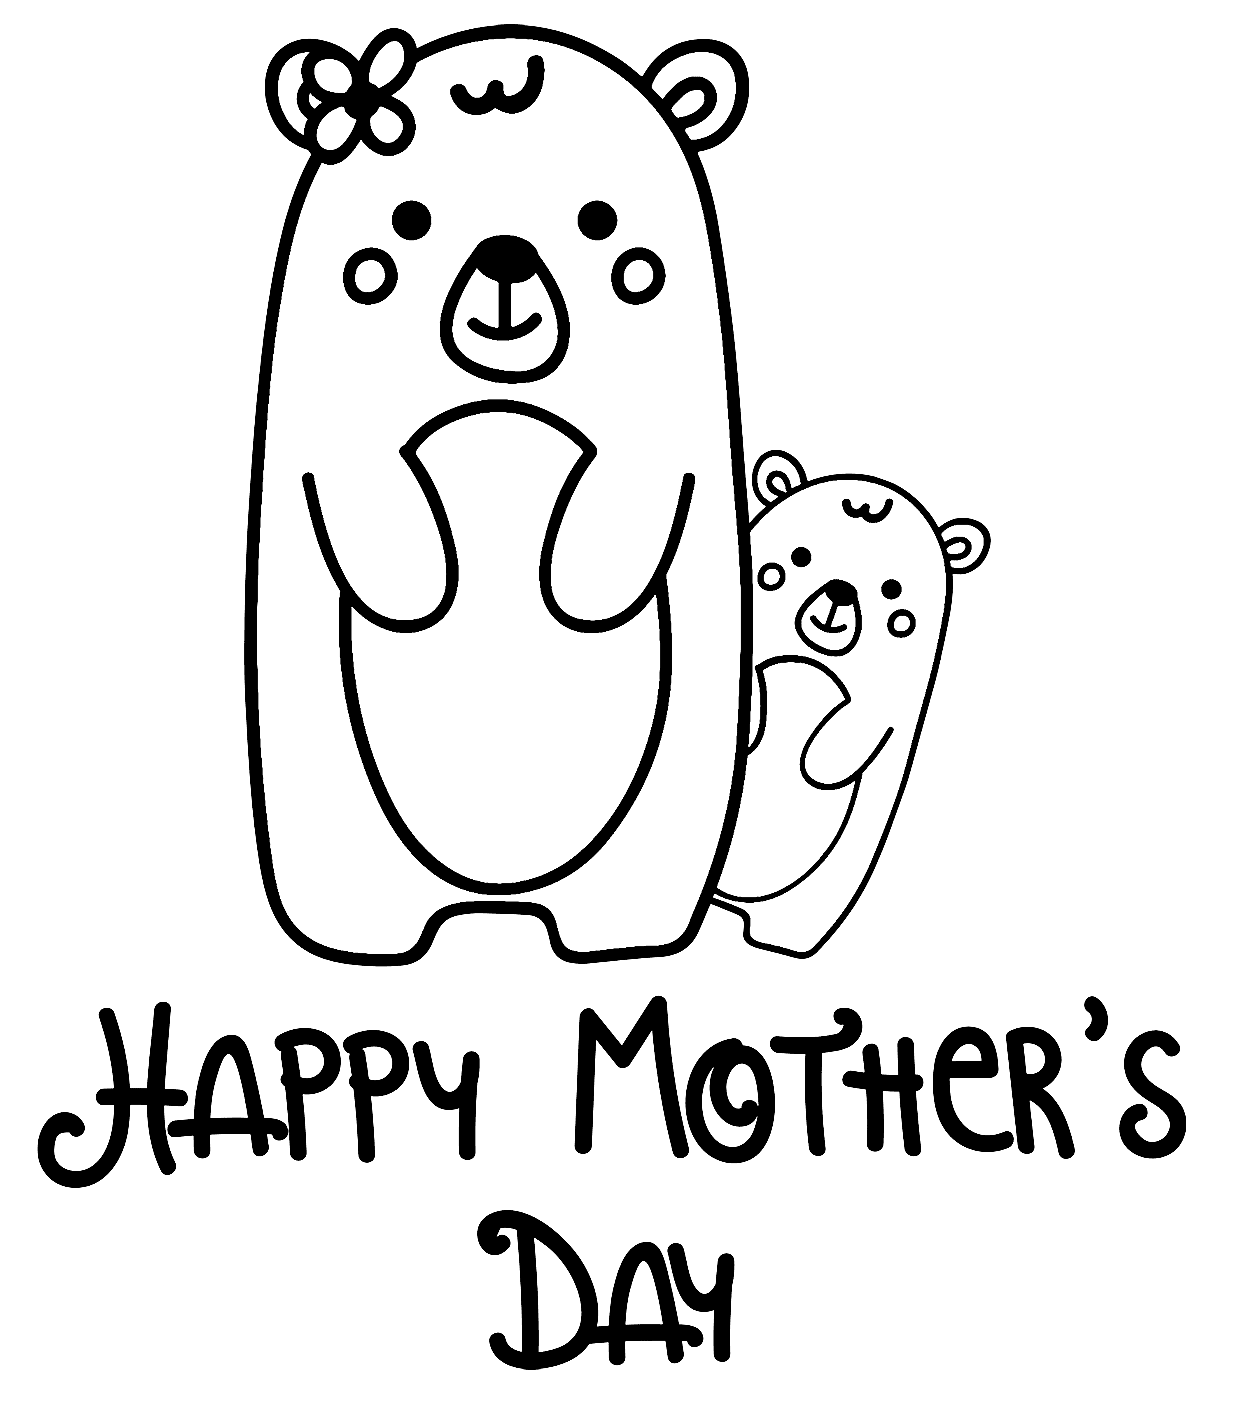 Happy Mothers Day and Two Cute Bears Coloring Page